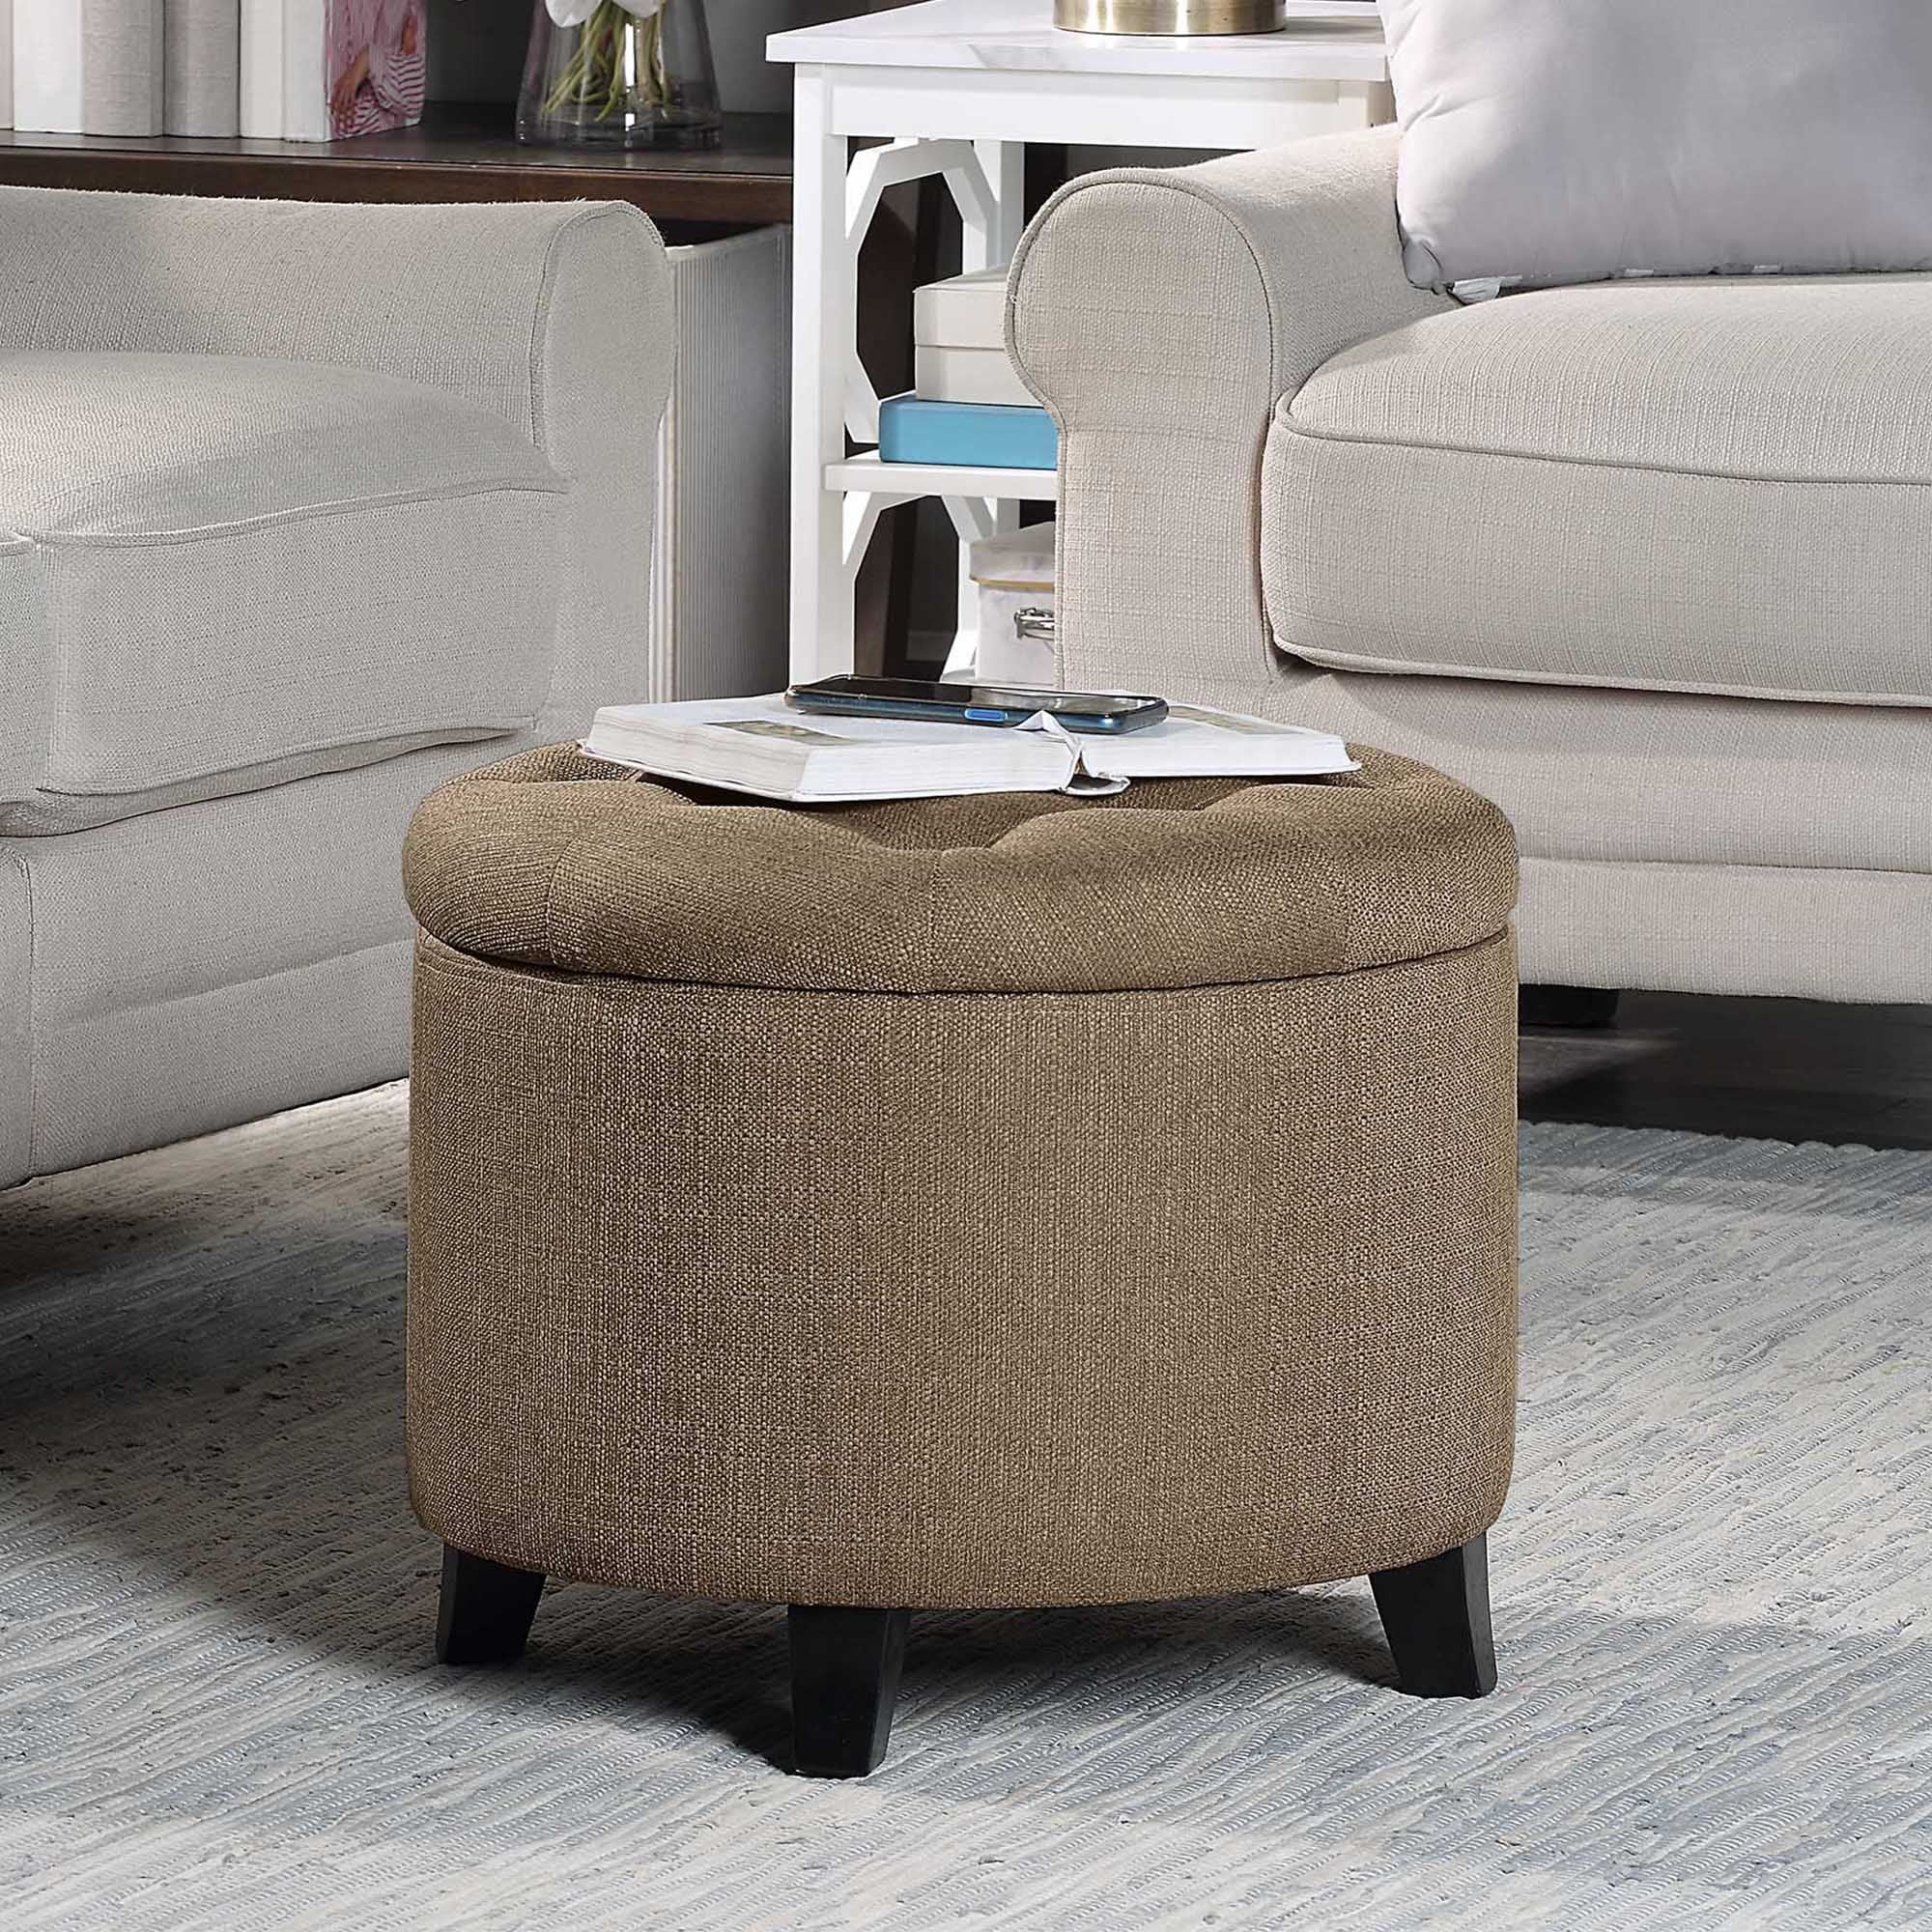 Sandstone Fabric Tufted Round Storage Ottoman with Solid Rubberwood Legs